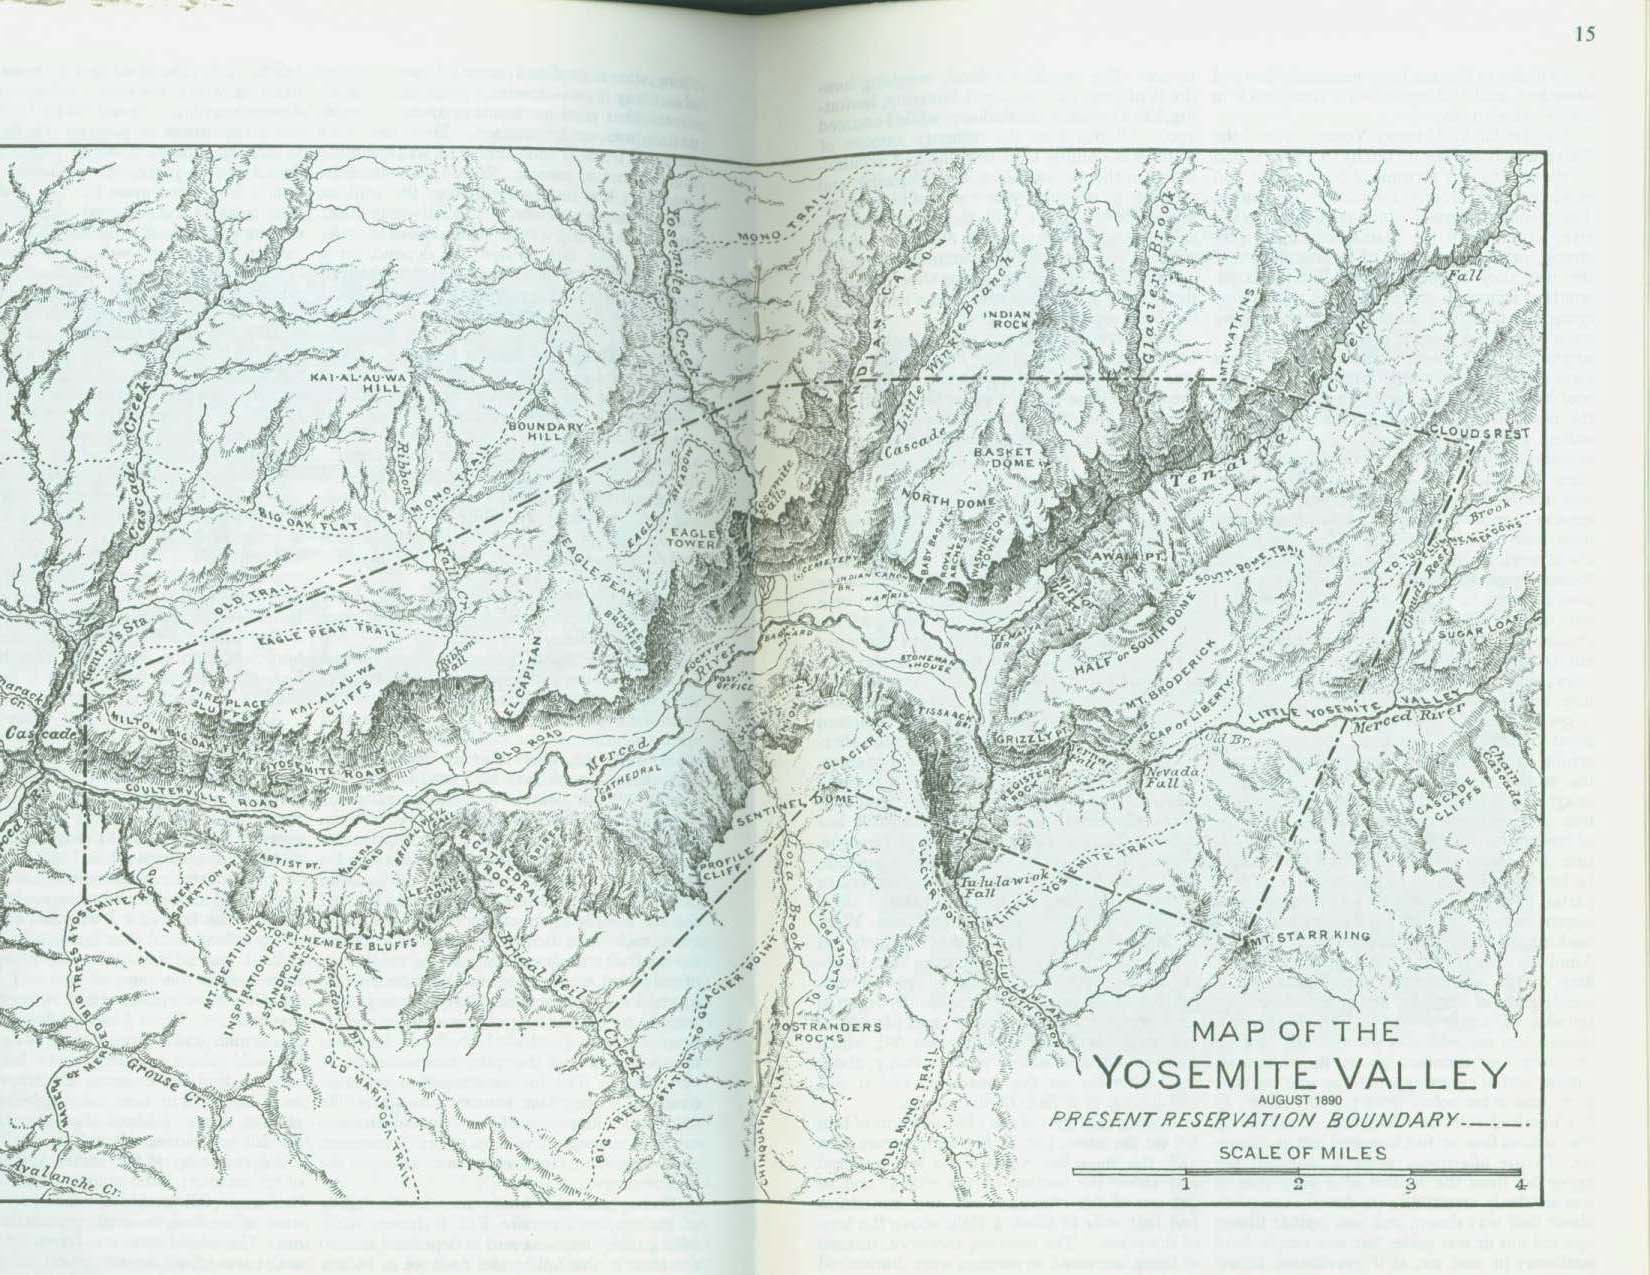 The Proposed Yosemite National Park--treasures & features, 1890. vis0003f